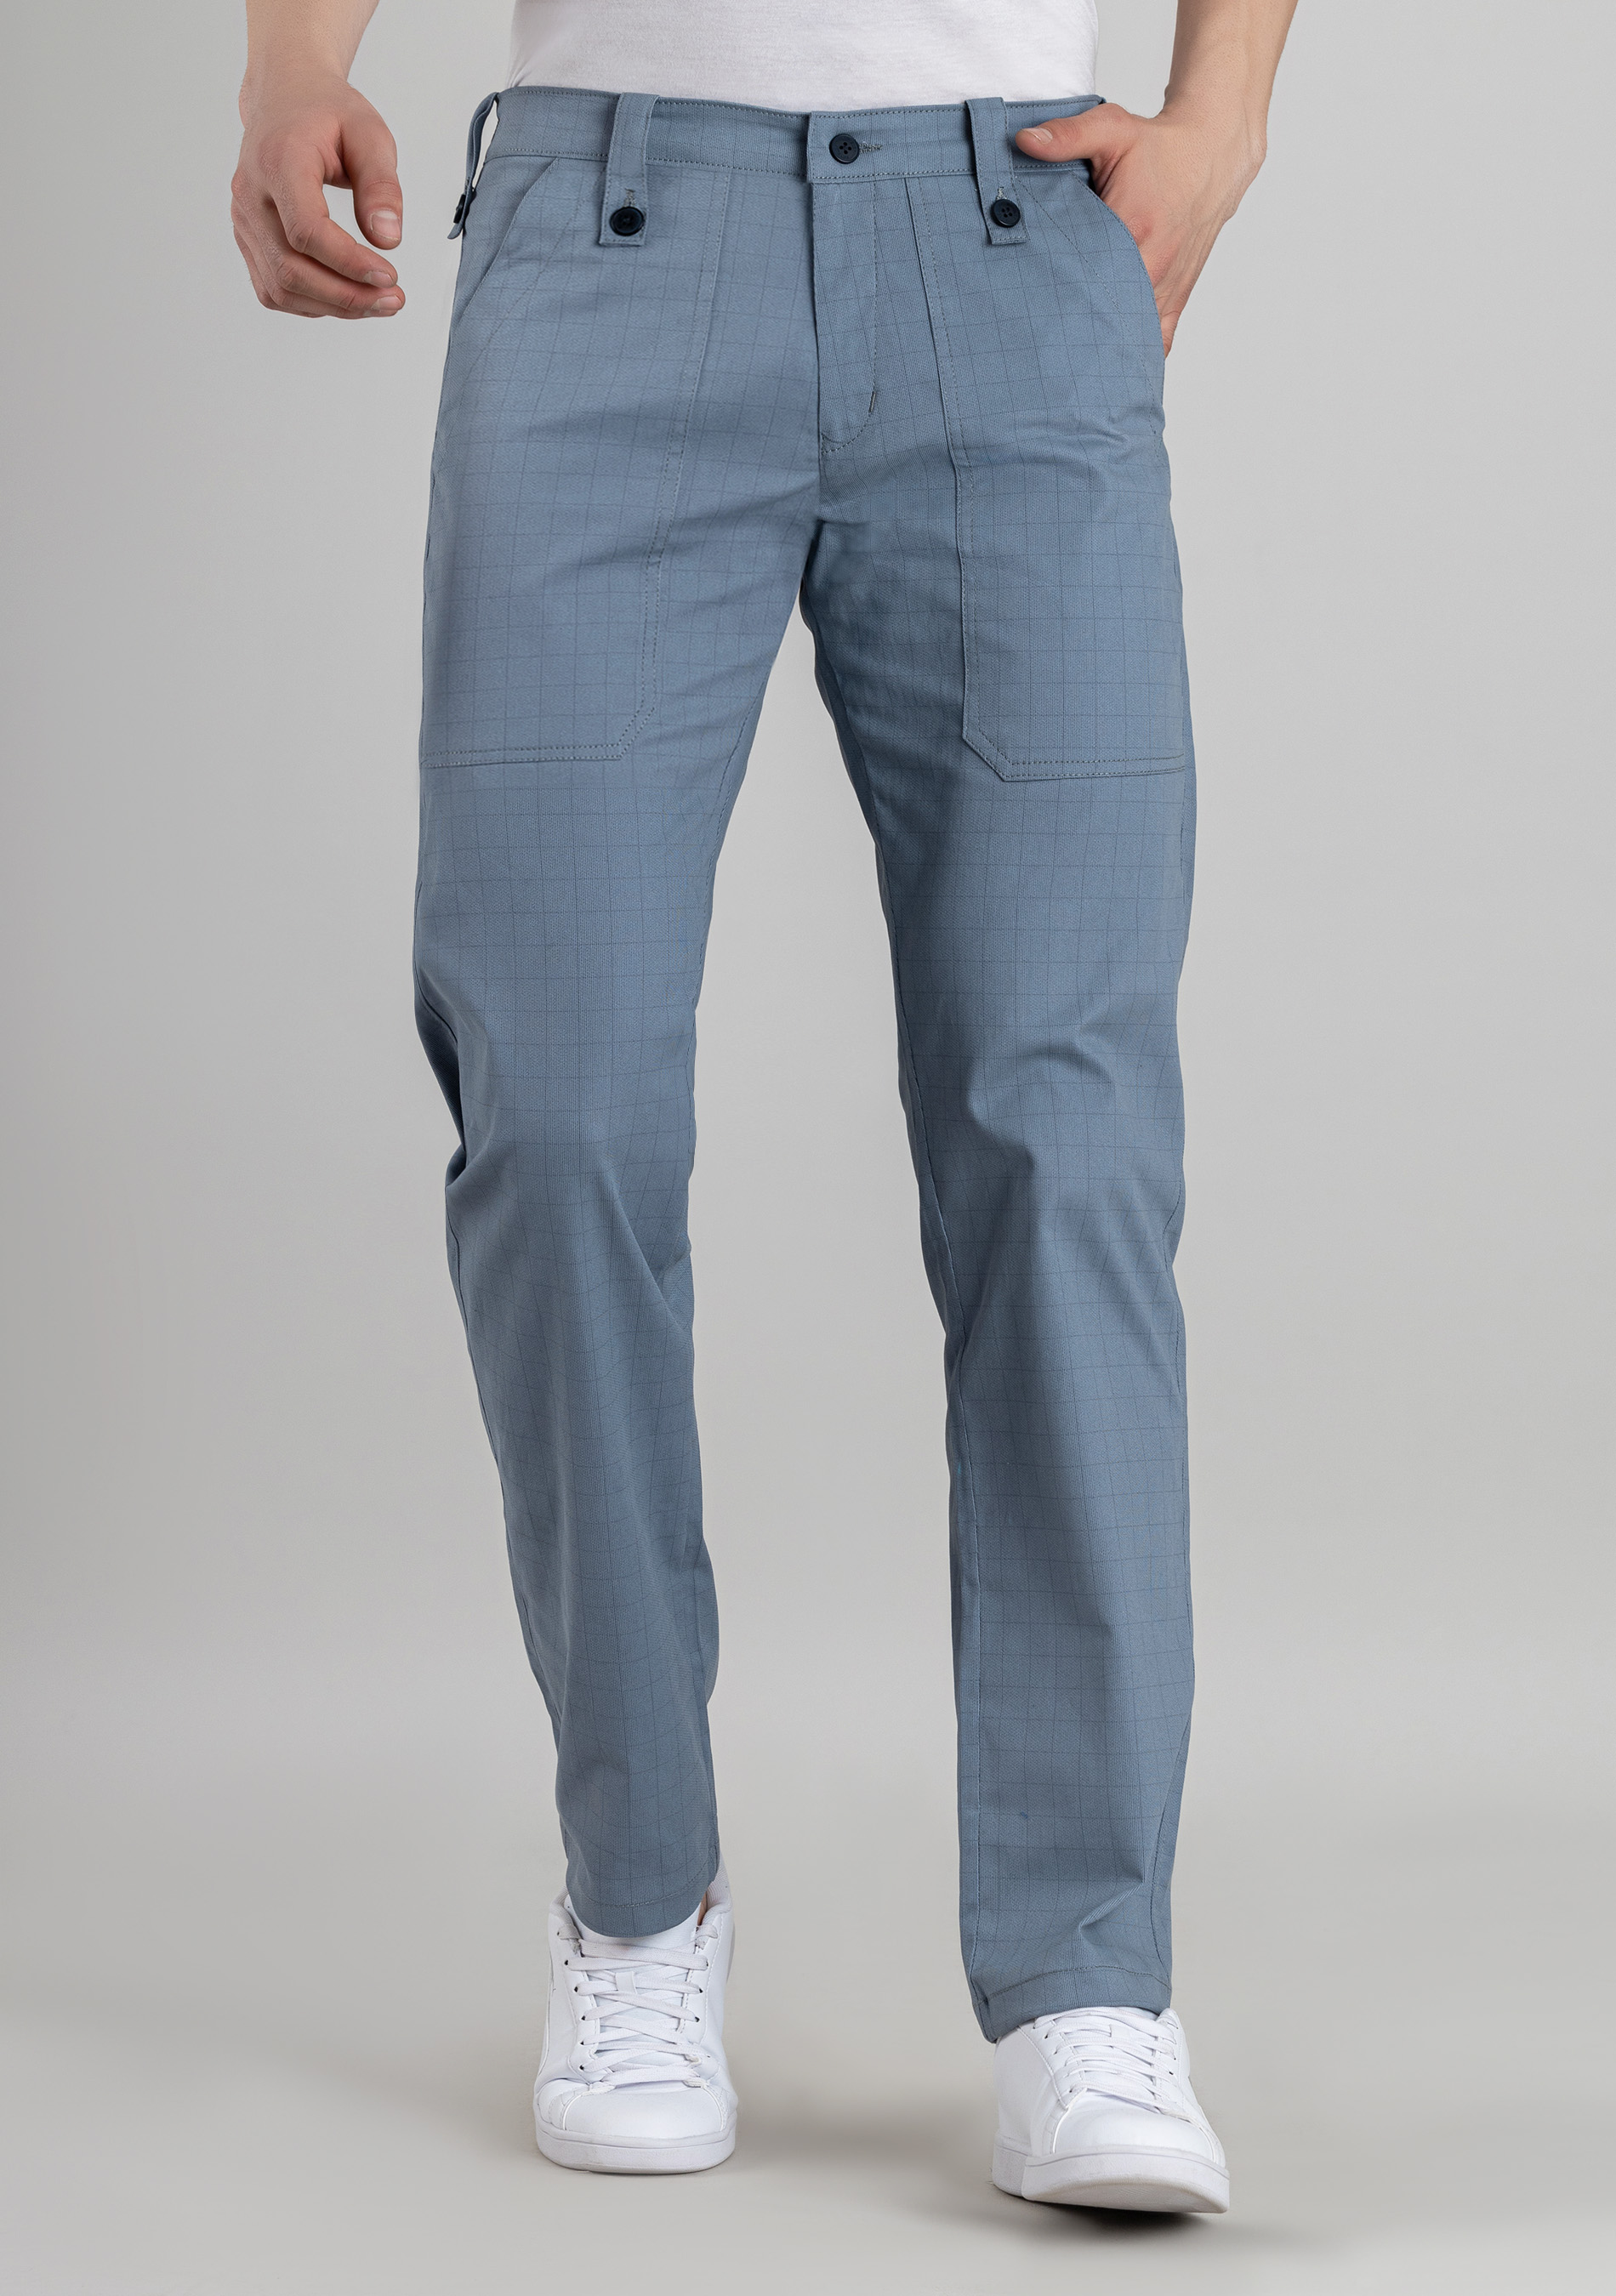 Checked Casual Men Slim Fit Pants 23.90 - MOI OUTFIT